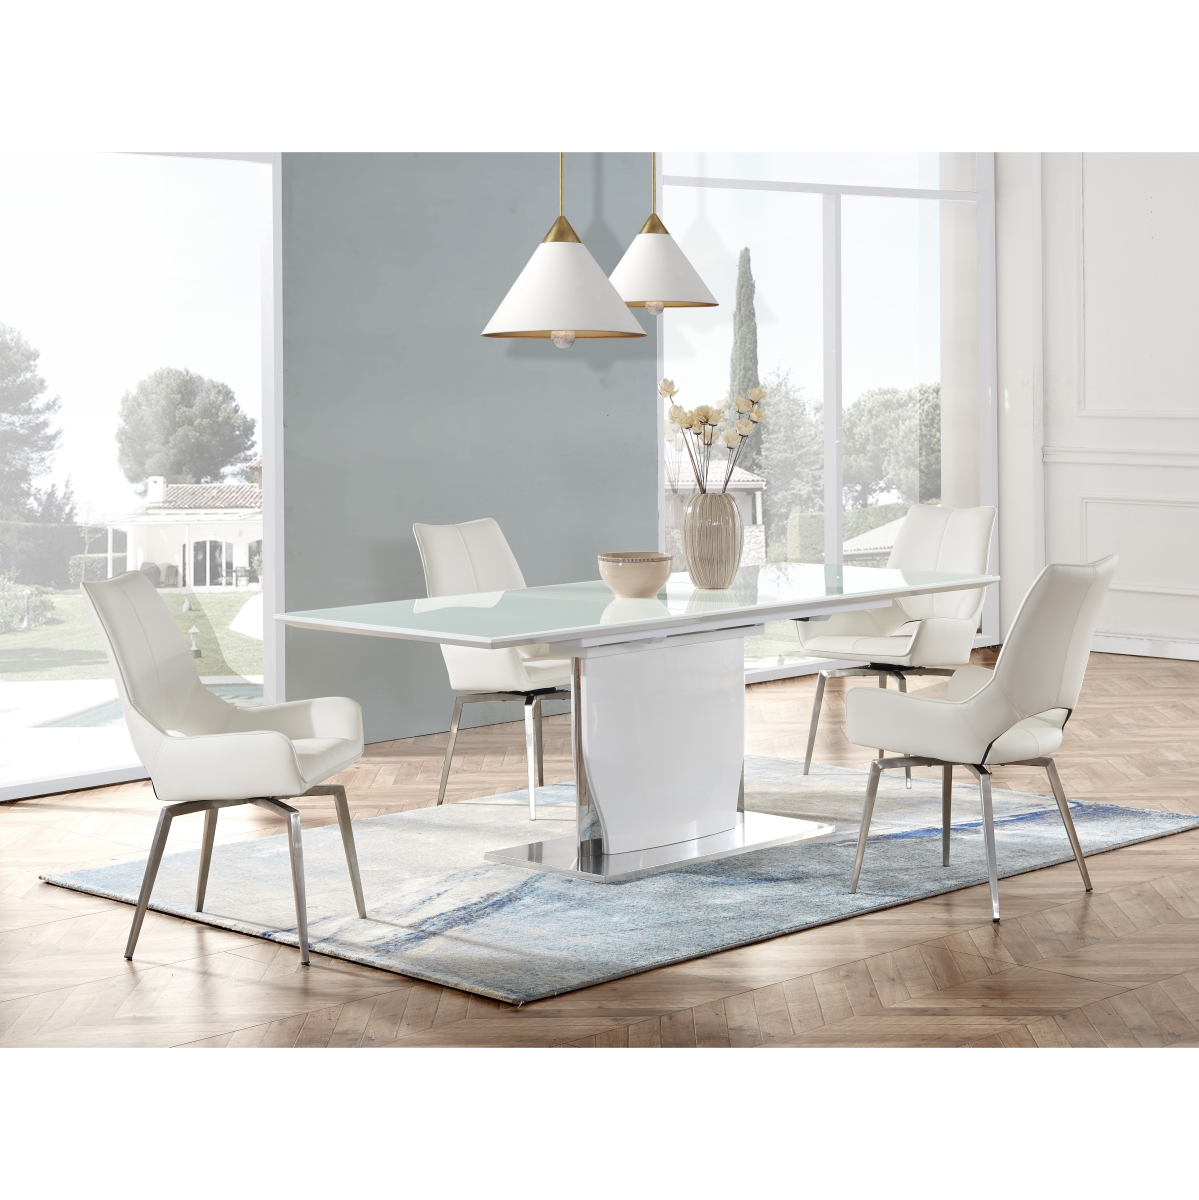 D2279DTPlusD4878NDC-WH White Dining Set -  Global Furniture USA, D2279DT+D4878NDC-WH